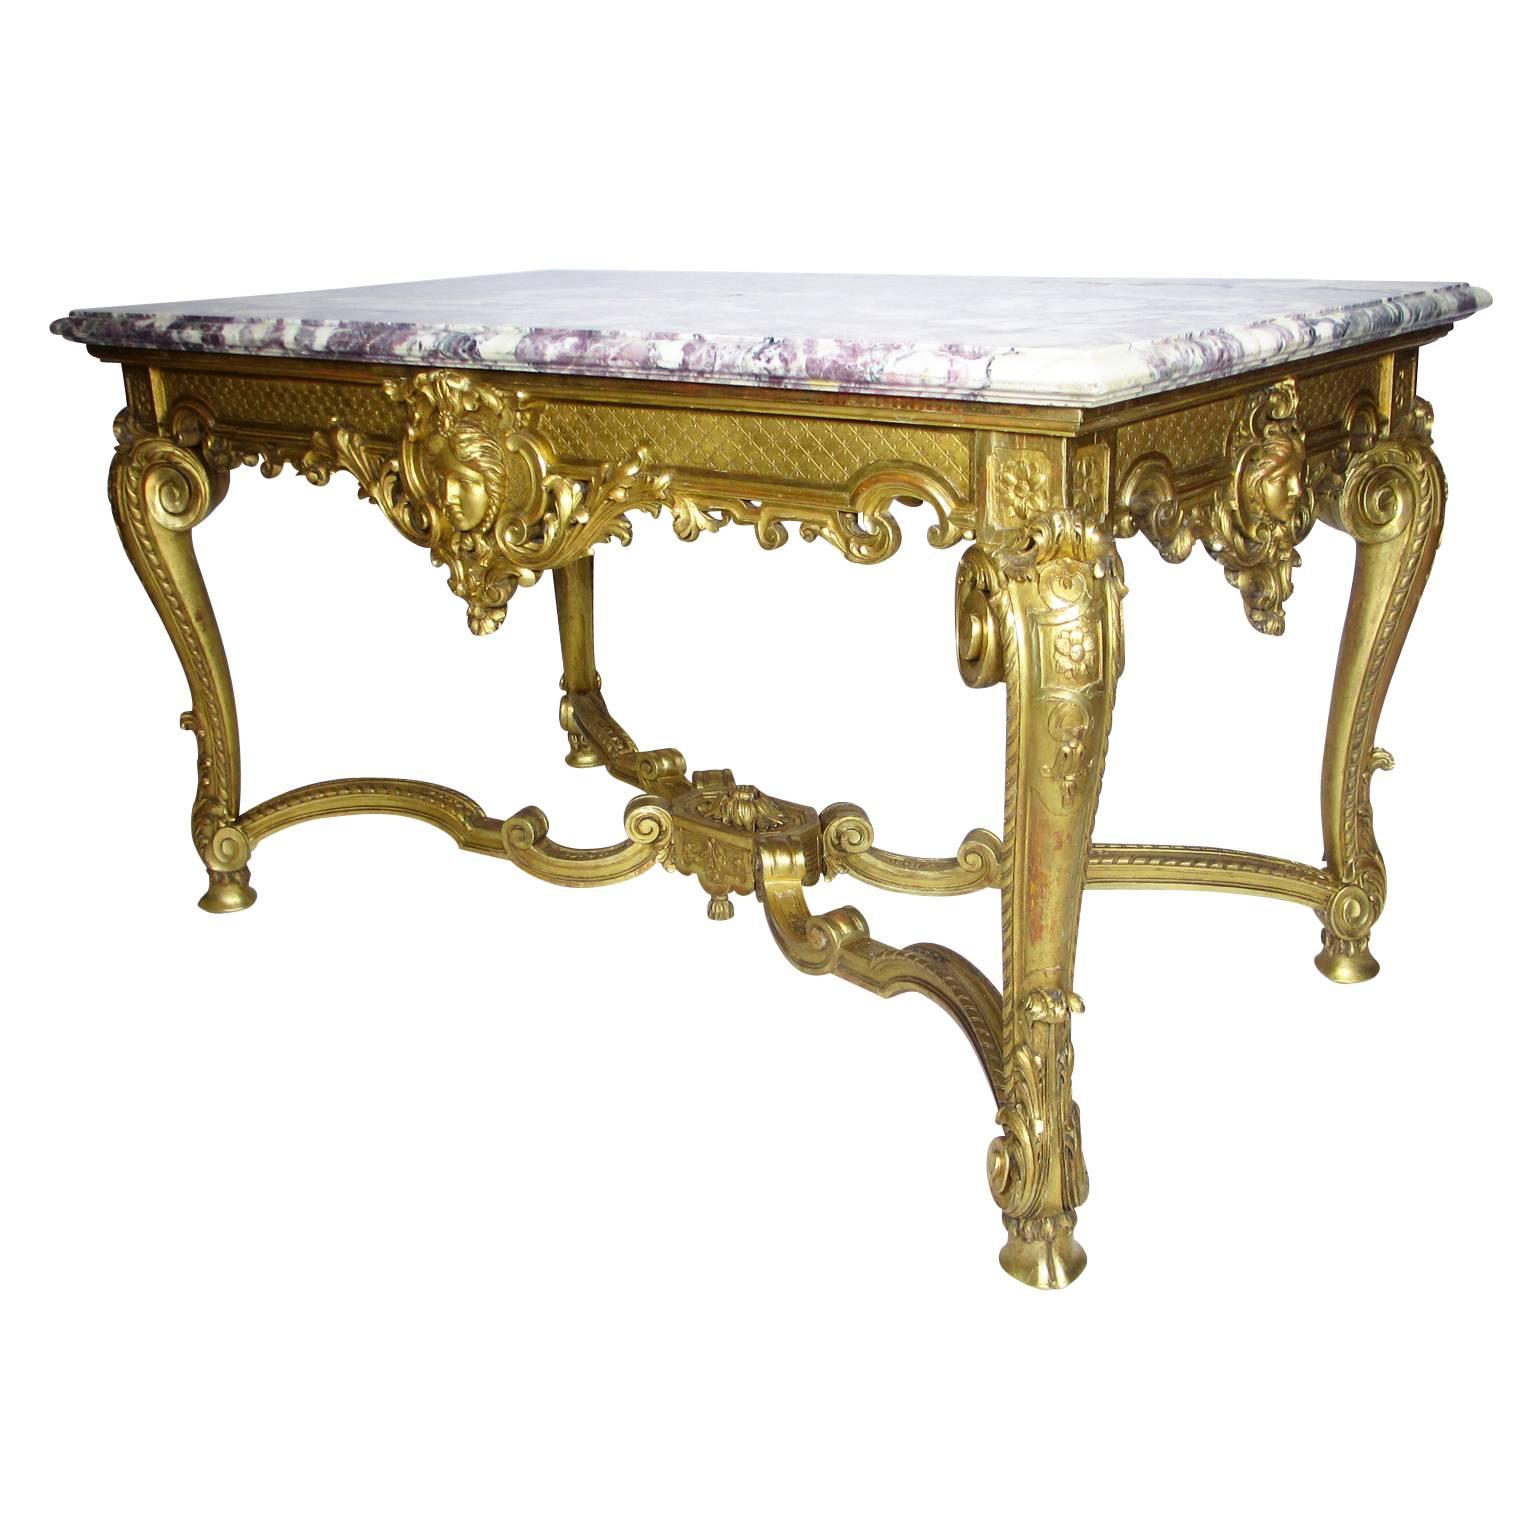 Fine French 19th Century Louis XV Style Giltwood Carved Figural Center Table For Sale 3